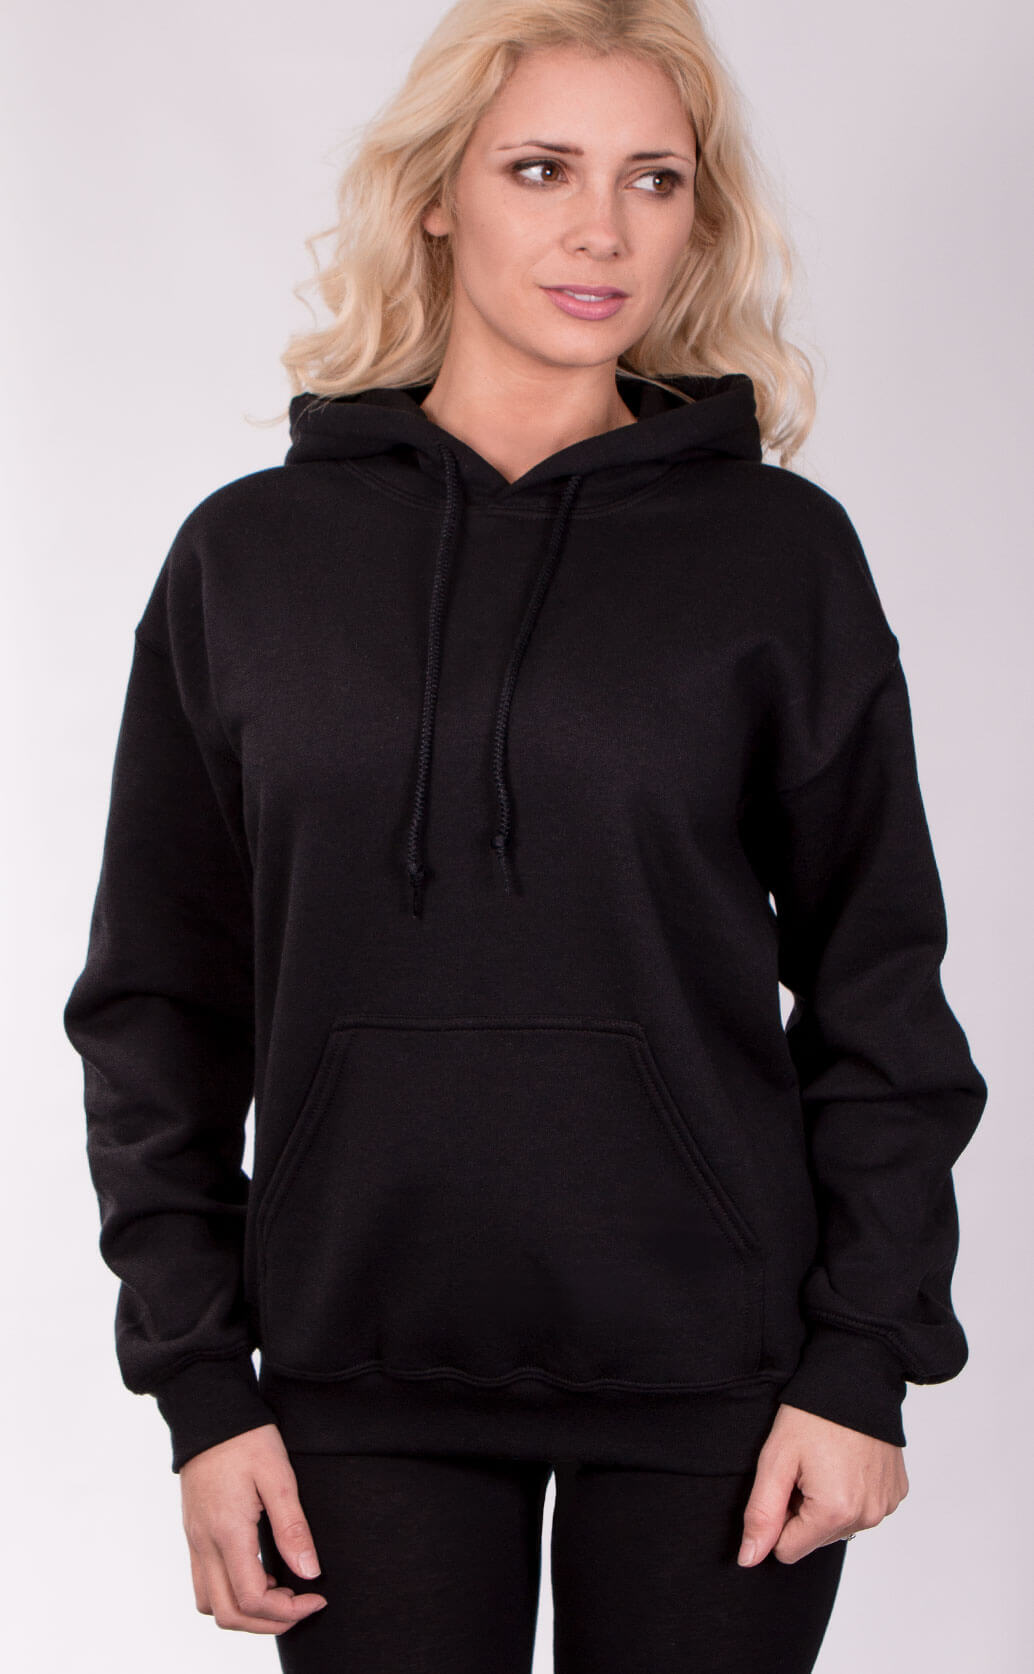 Size guide image for Unisex Hoodie ladies shirt type. Shot from the front. Model is dressed in black